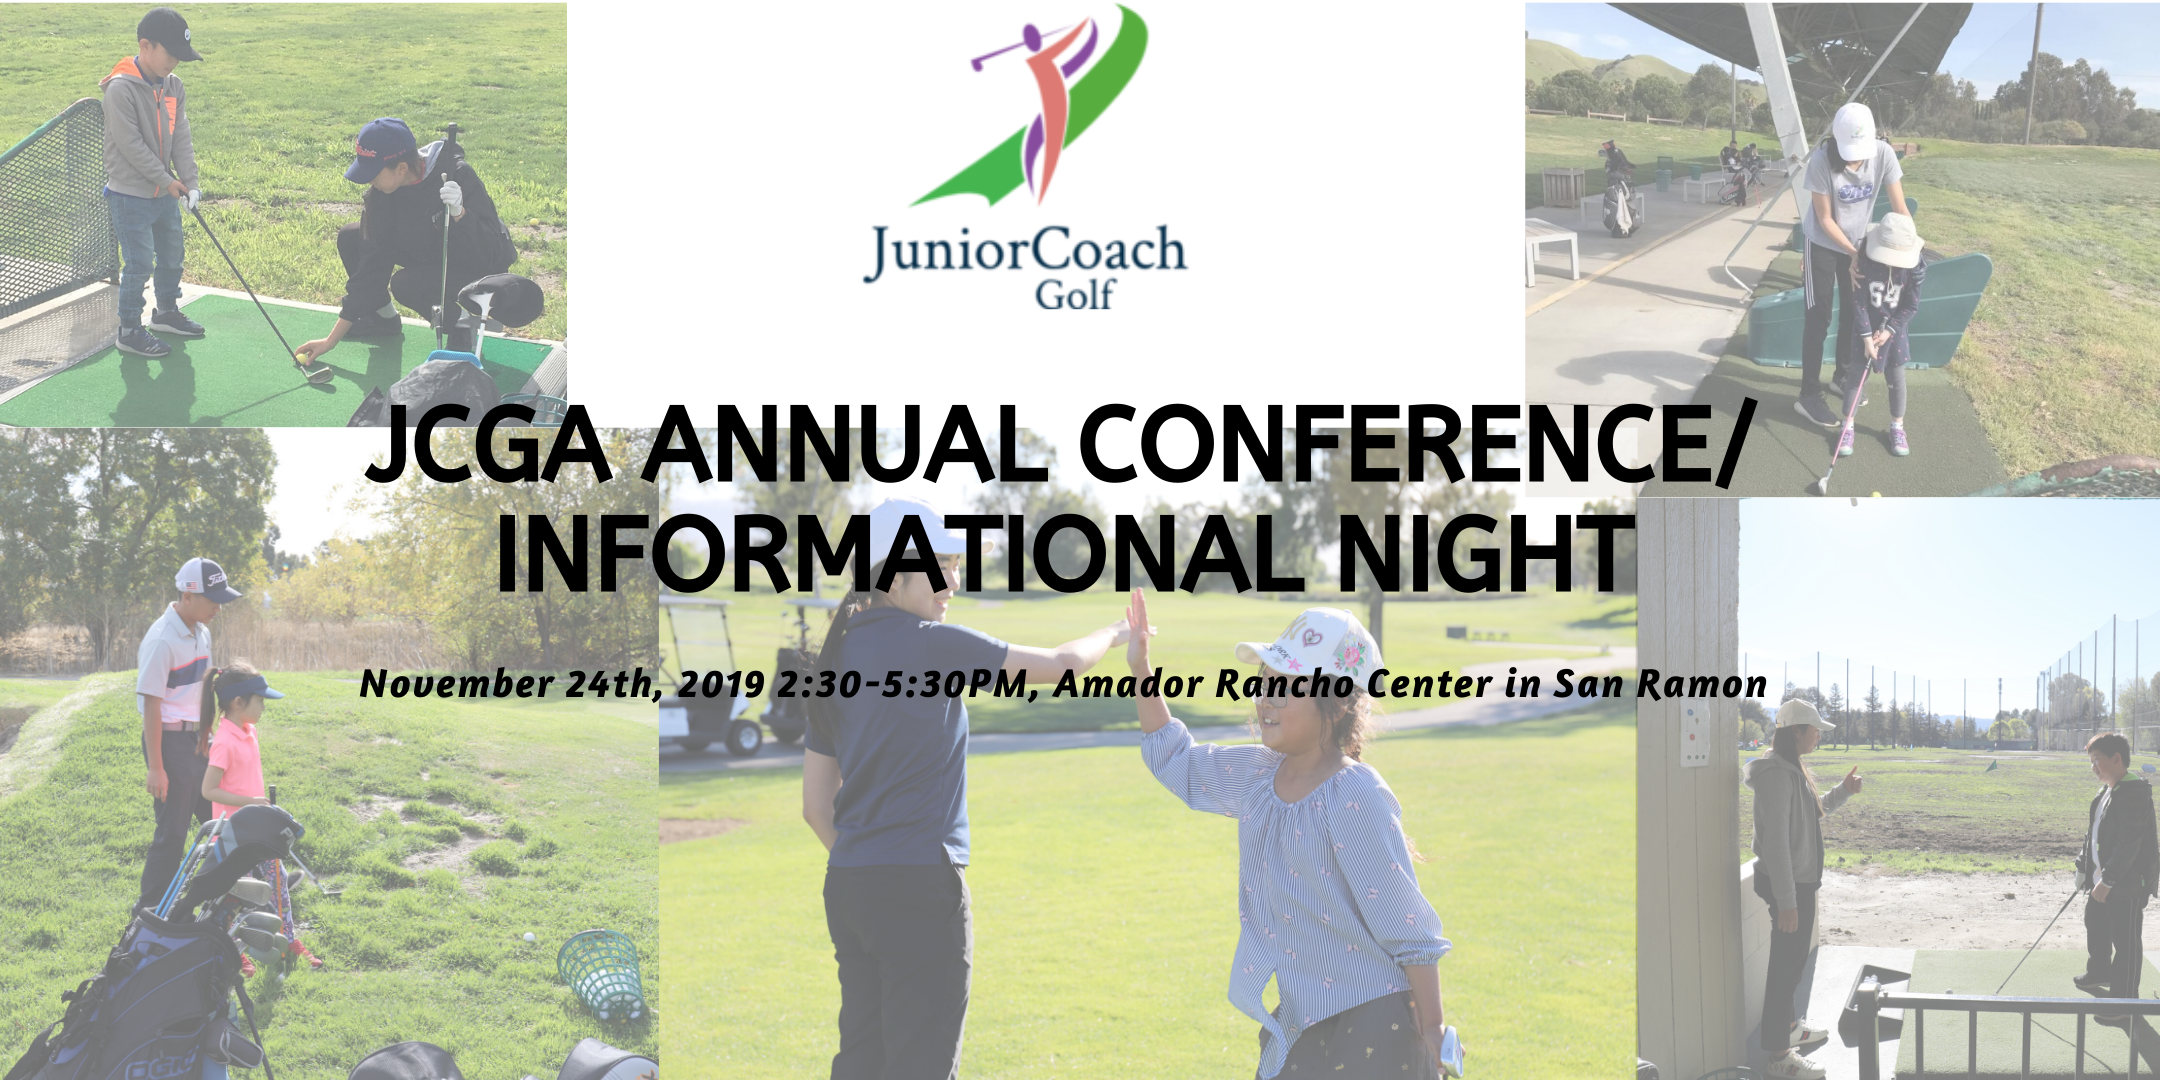 JCGA Conference/Informational Night: Learn about free youth golf lessons!